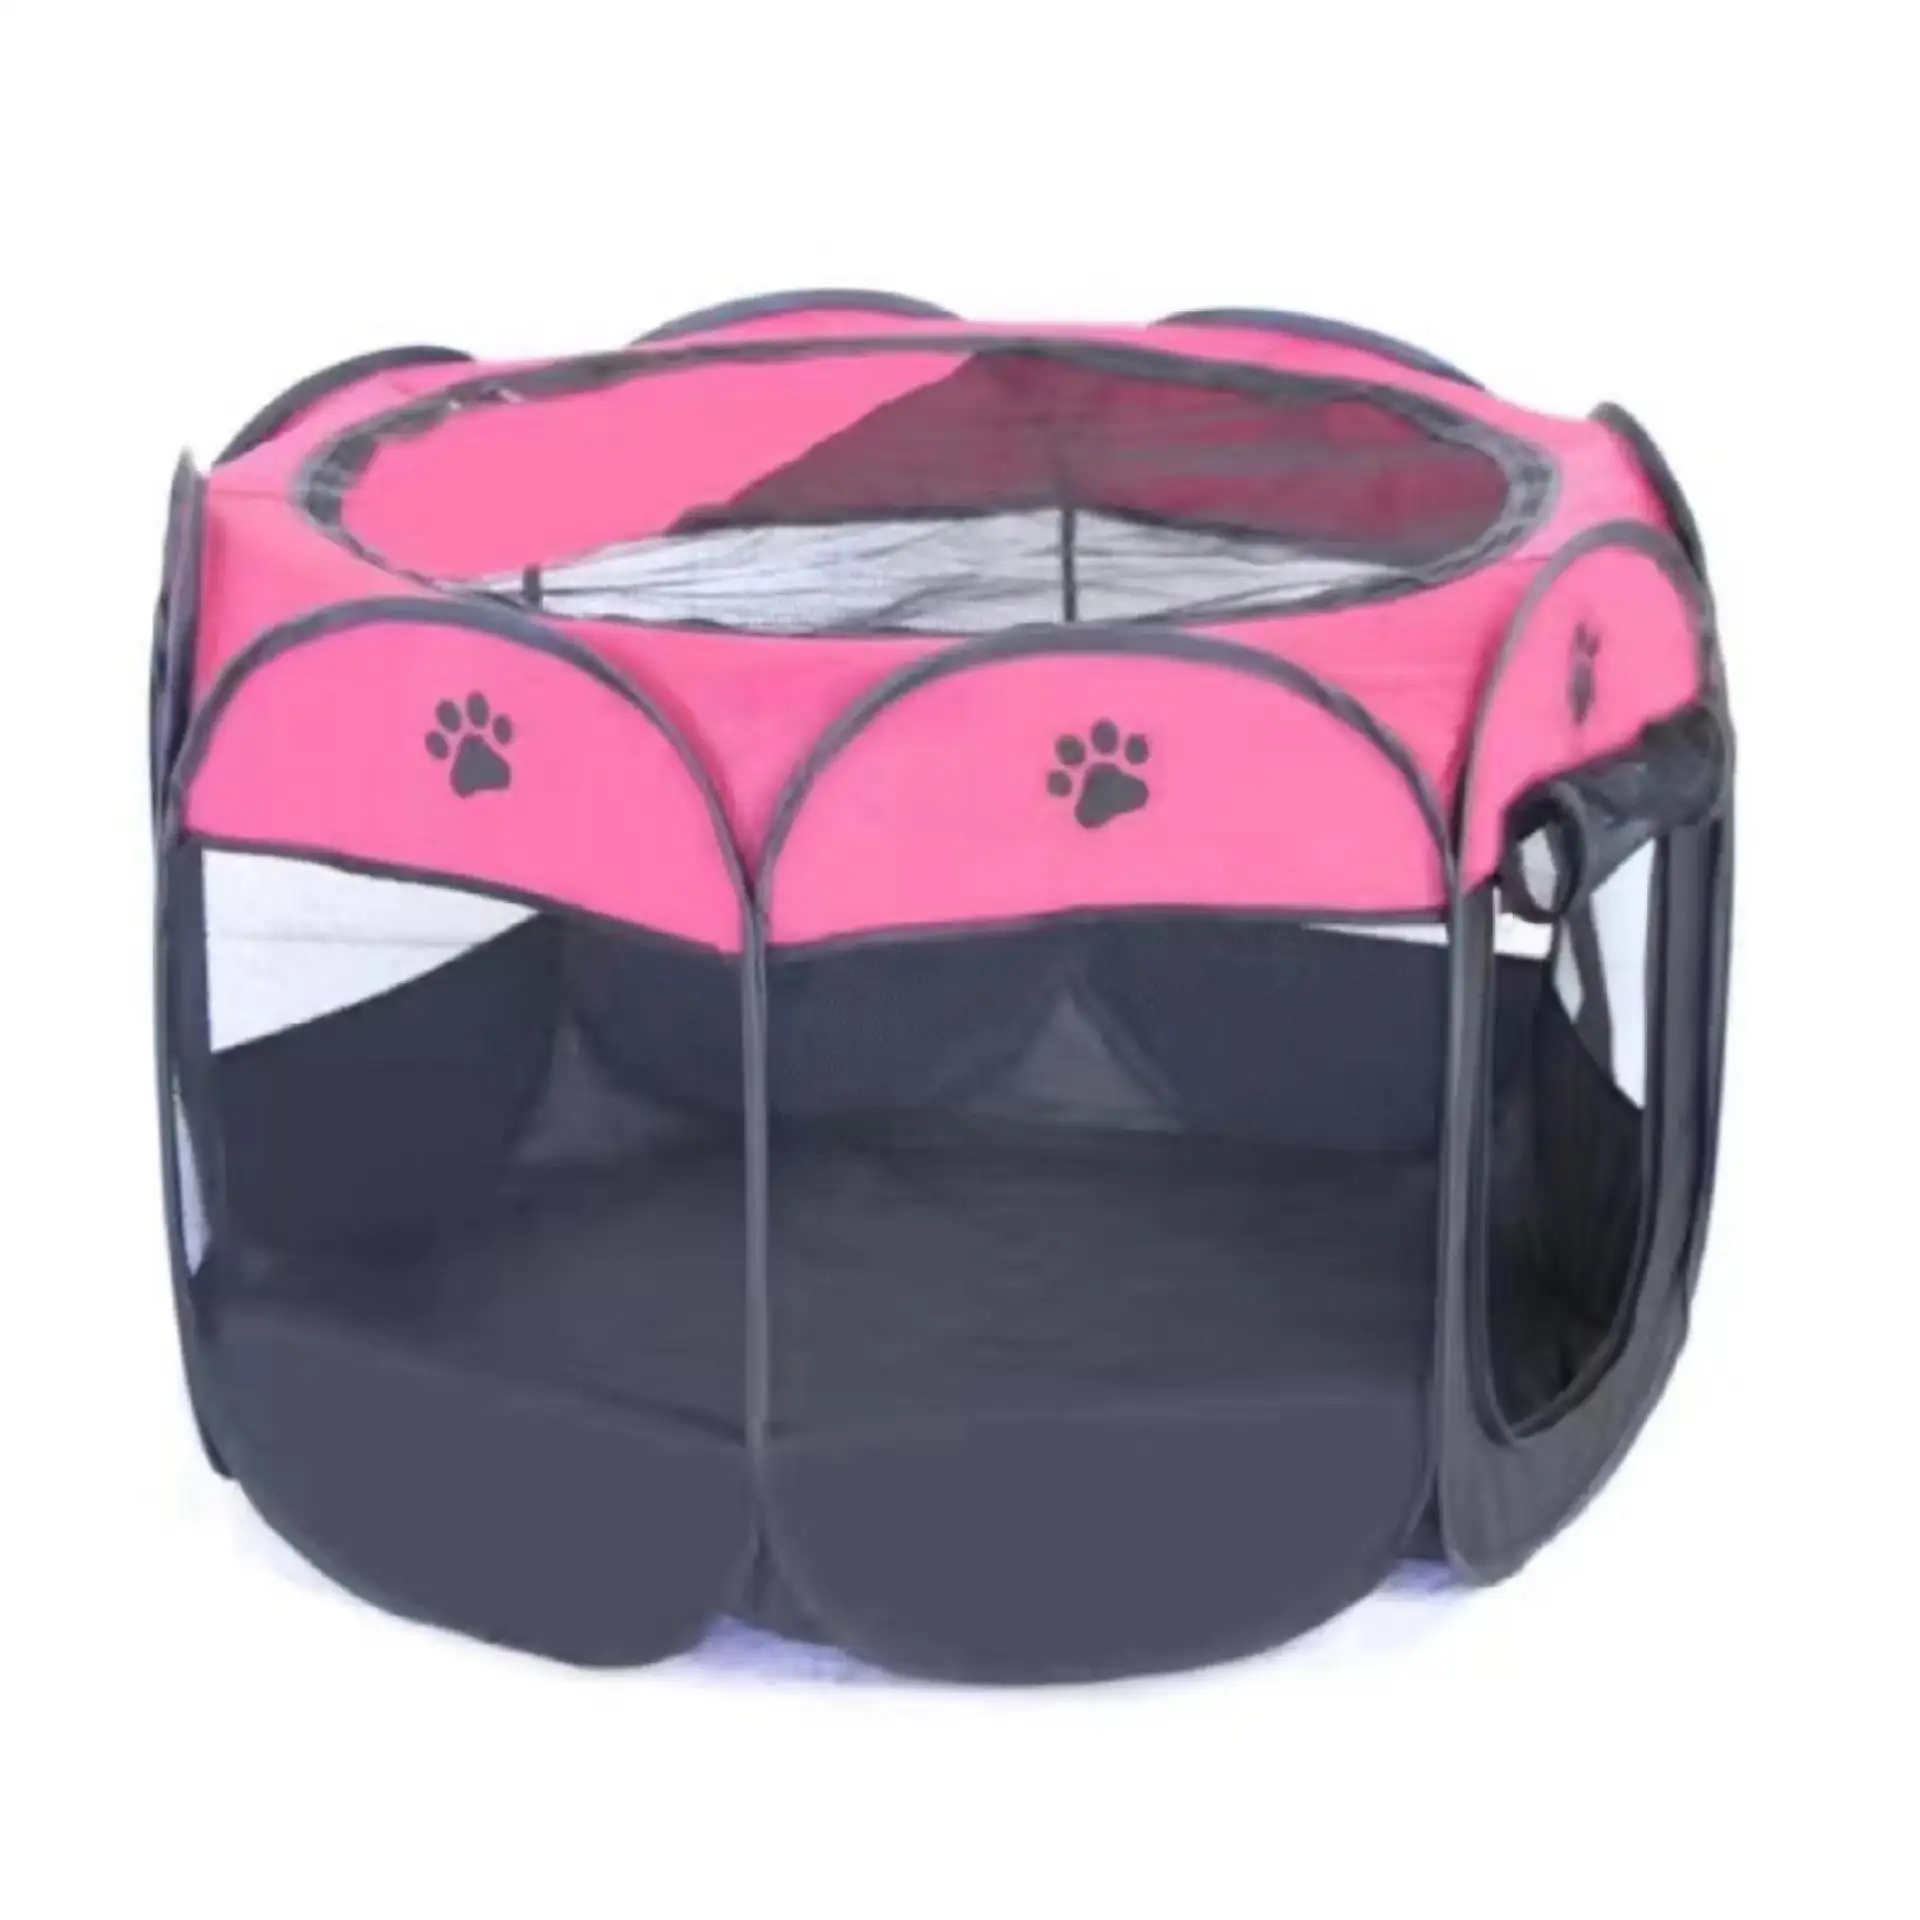 Portable Foldable Large Size Waterproof Animals Rest Sleep Octagonal Comfortable Pet Cage